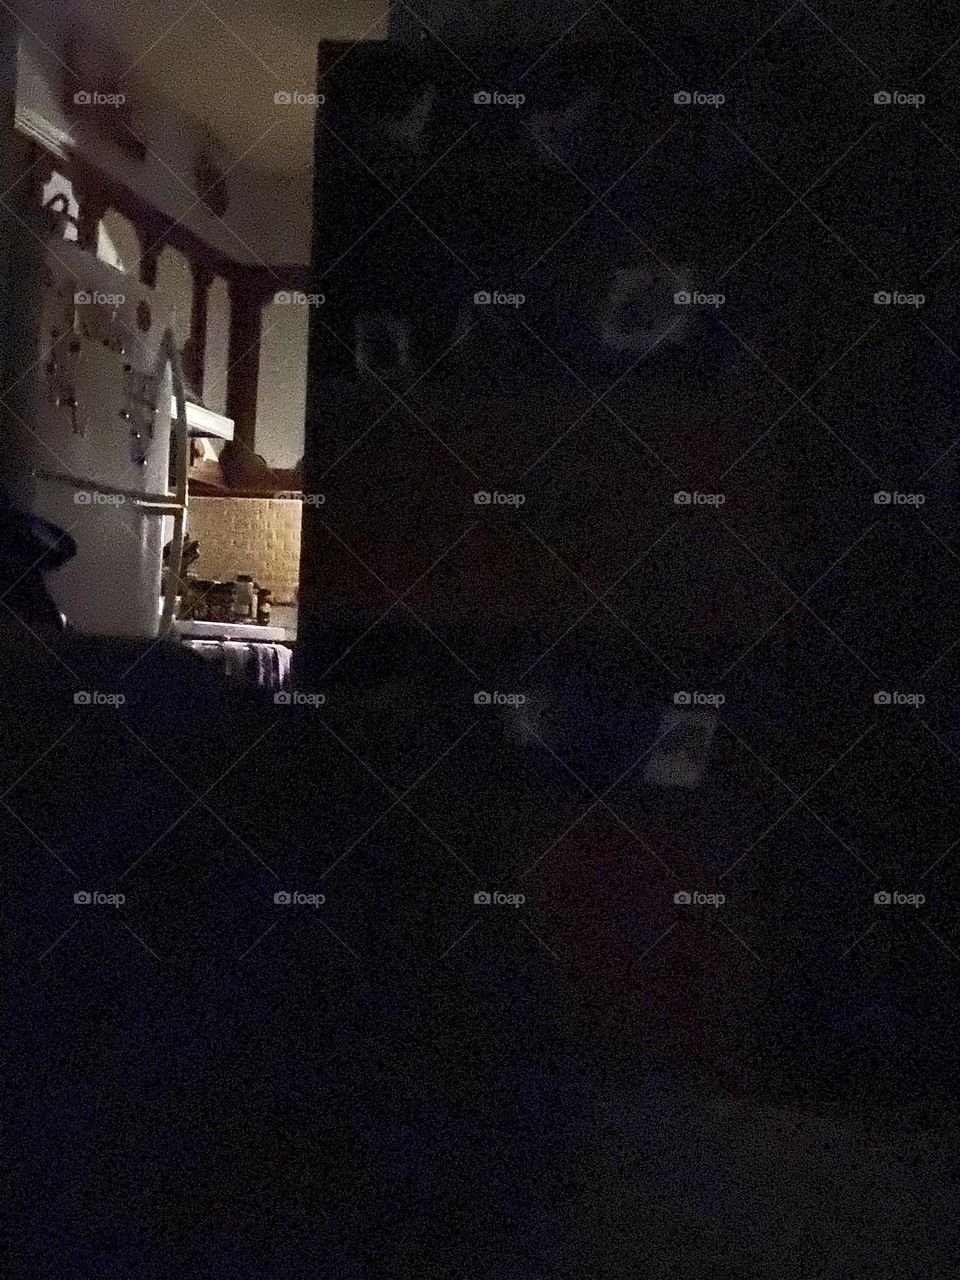 A view of the refrigerator from the dark living room taken with night mode on my iPhone 11. When watching TV often the refrigerator is calling: “Get a snack!” Even in the dark, I know it’s there. The kitchen beckons. I usually resist though. 